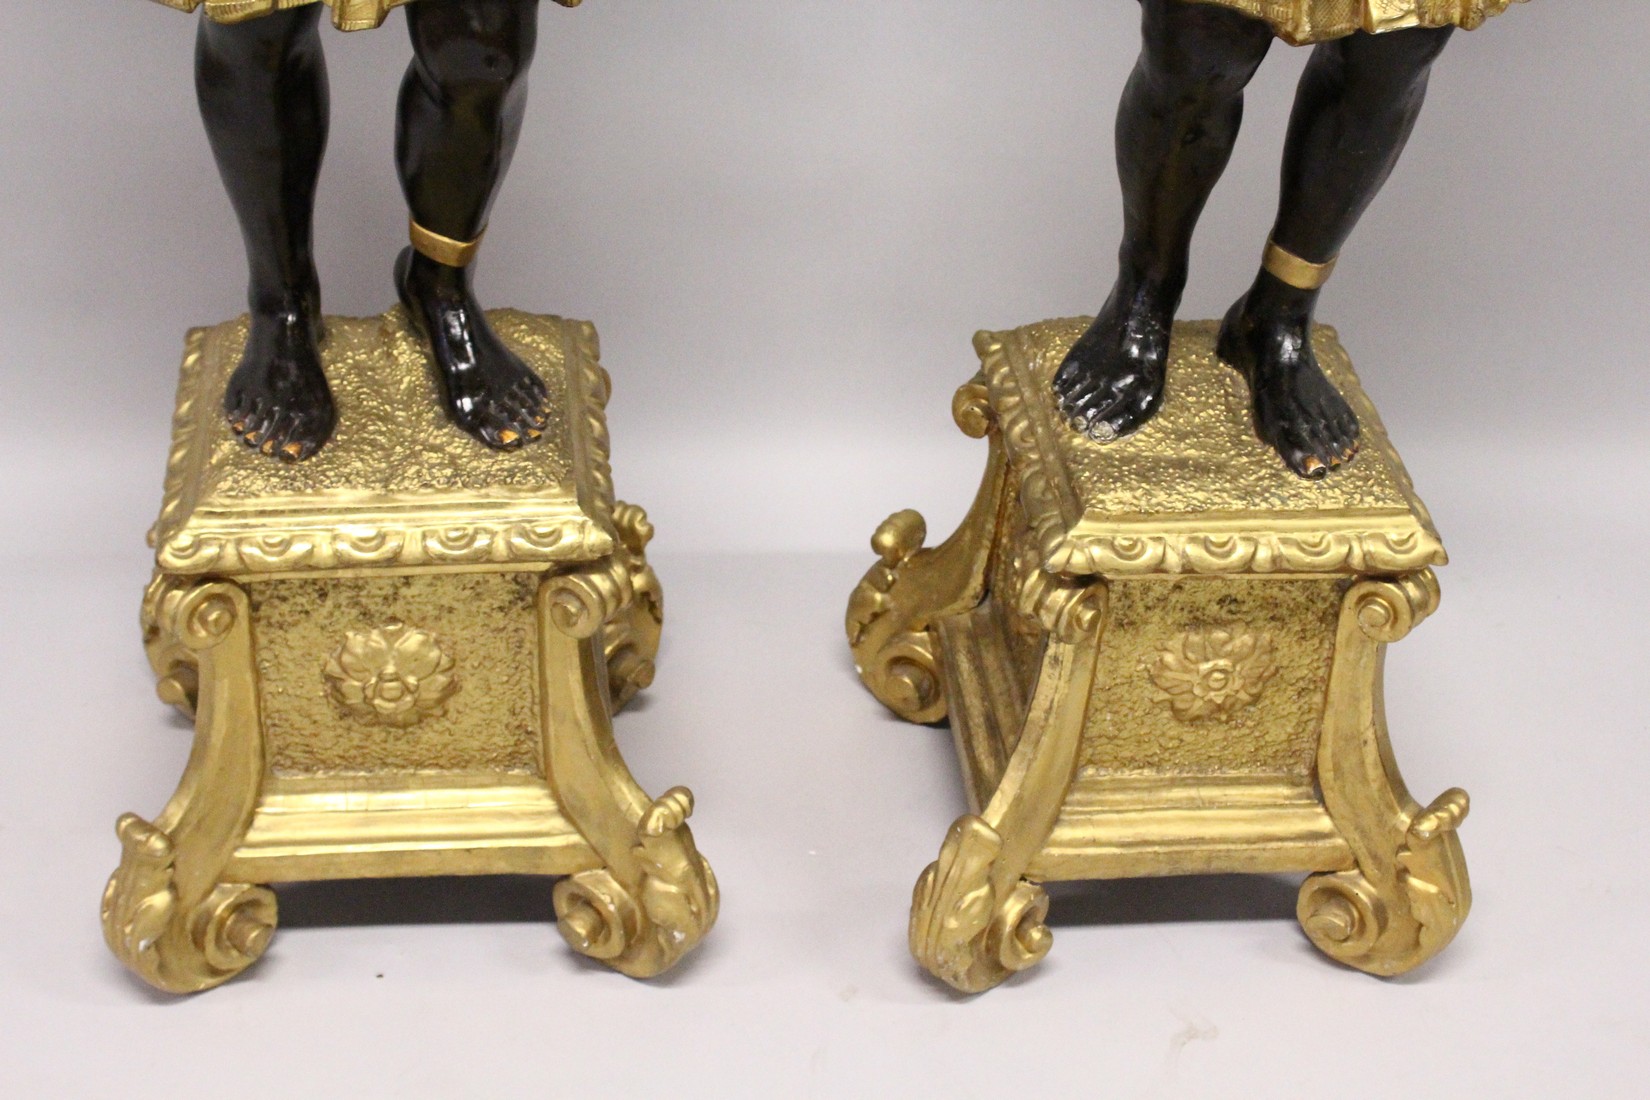 A SUPERB LARGE PAIR OF 19TH CENTURY STANDING NUBILE FIGURE CANDELABRA formed as a a pair of - Image 2 of 7